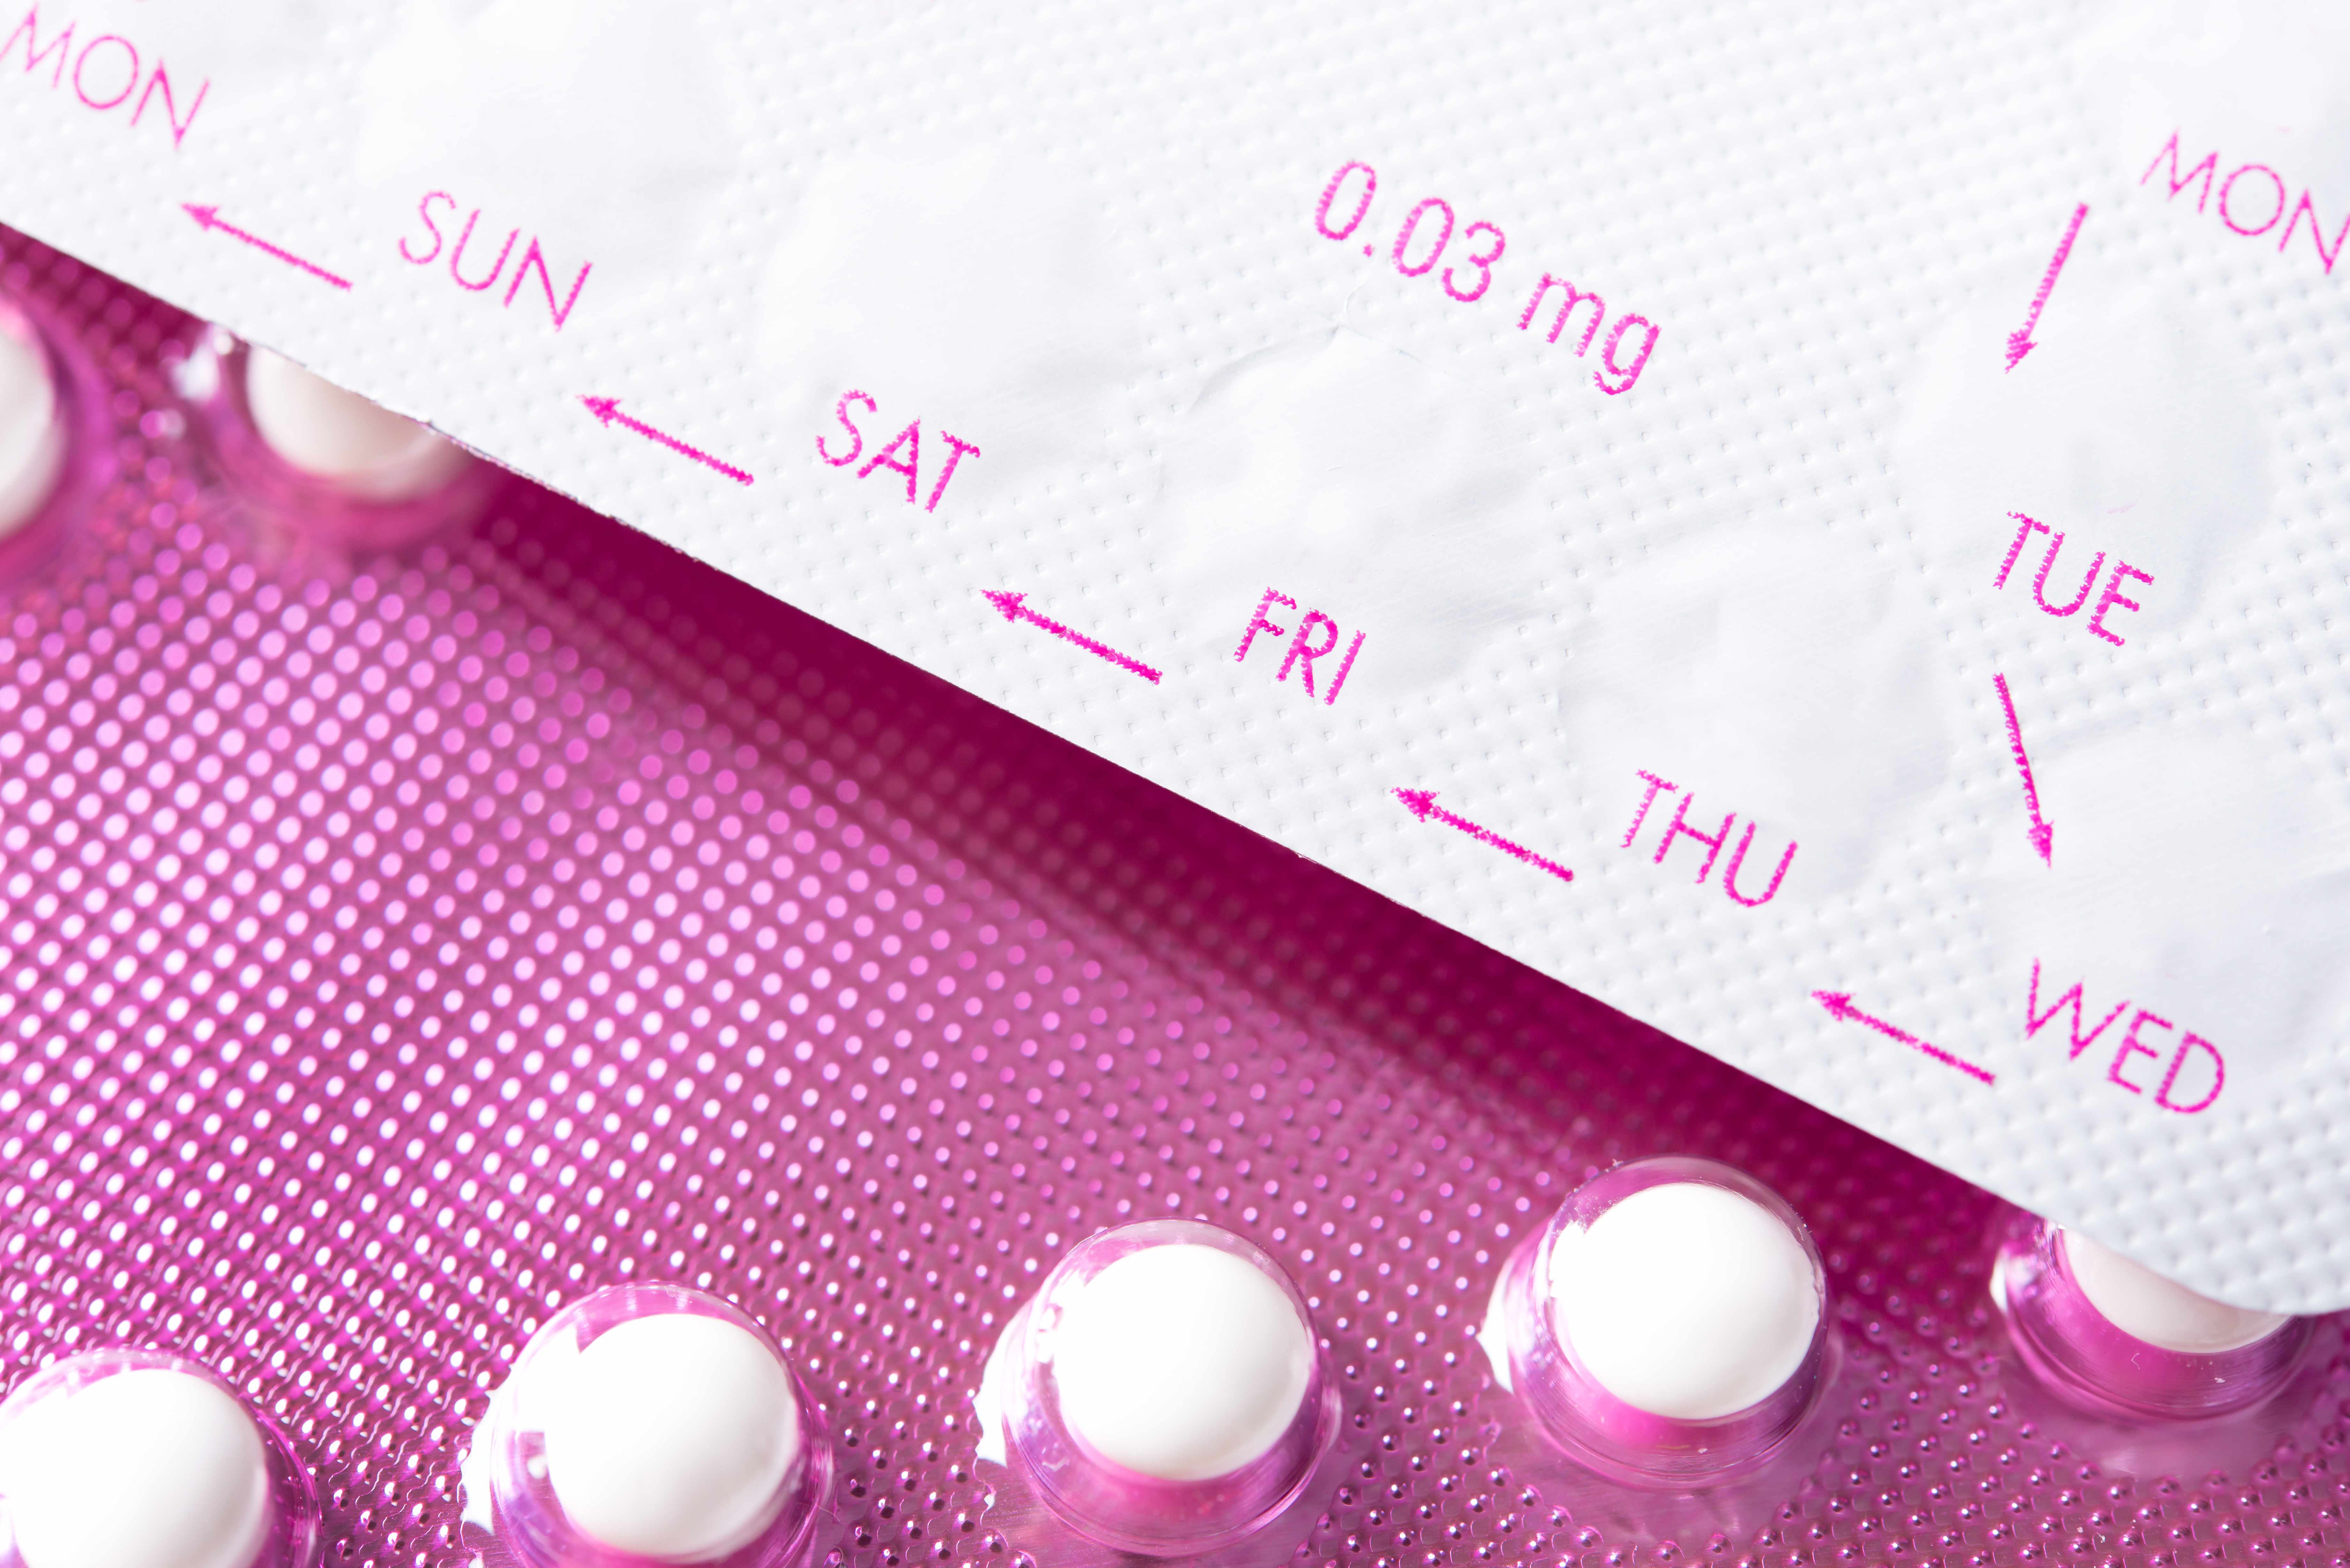 close up of packet of pills, birth control pills